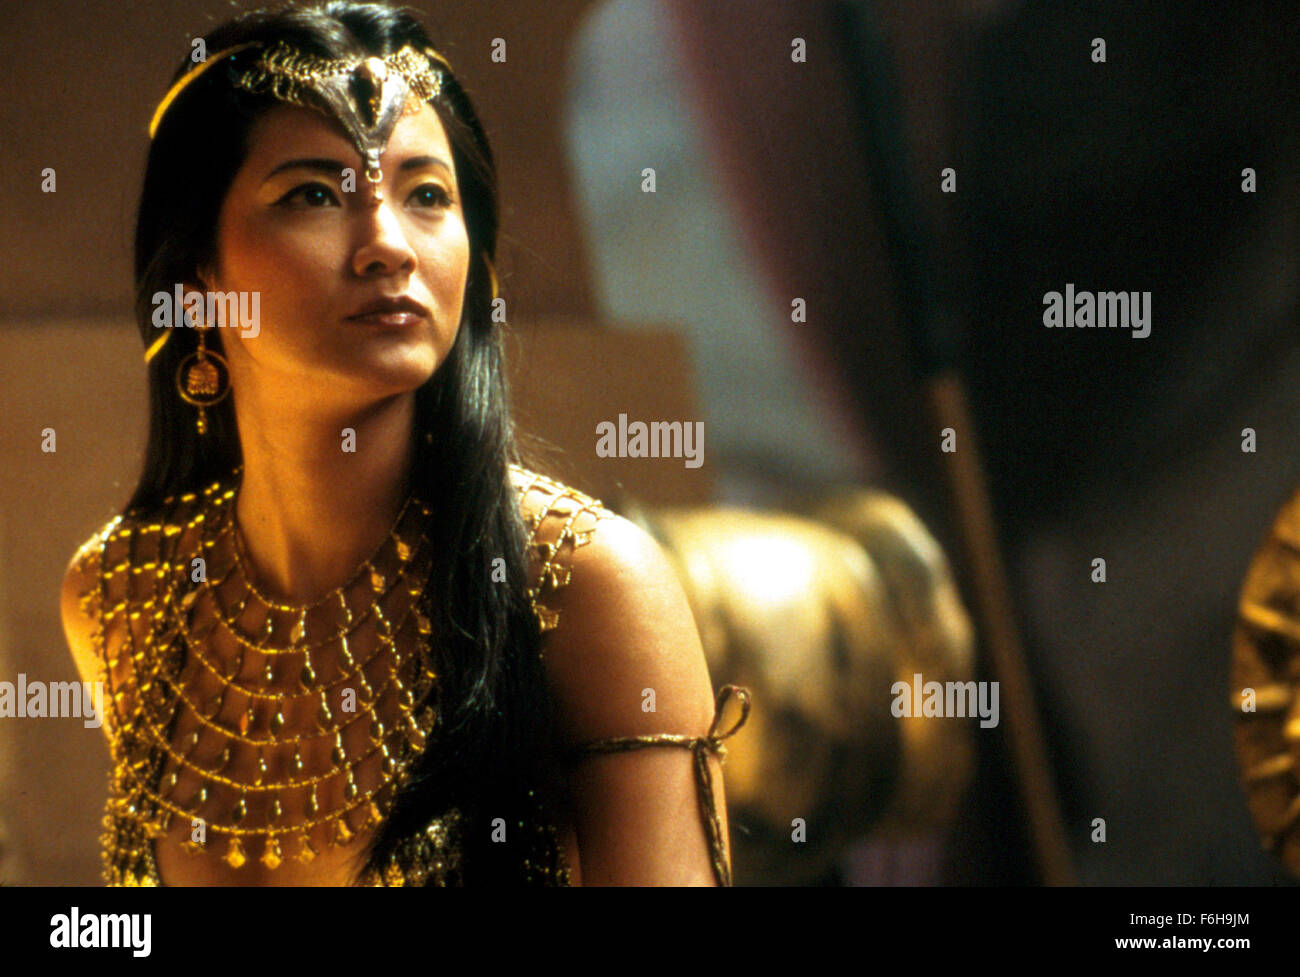 Apr 17, 2002; Los Angeles, CA, USA; KELLY HU stars as Cassandra in action adventure 'The Scorpion King' directed by Chuck Russell. Stock Photo